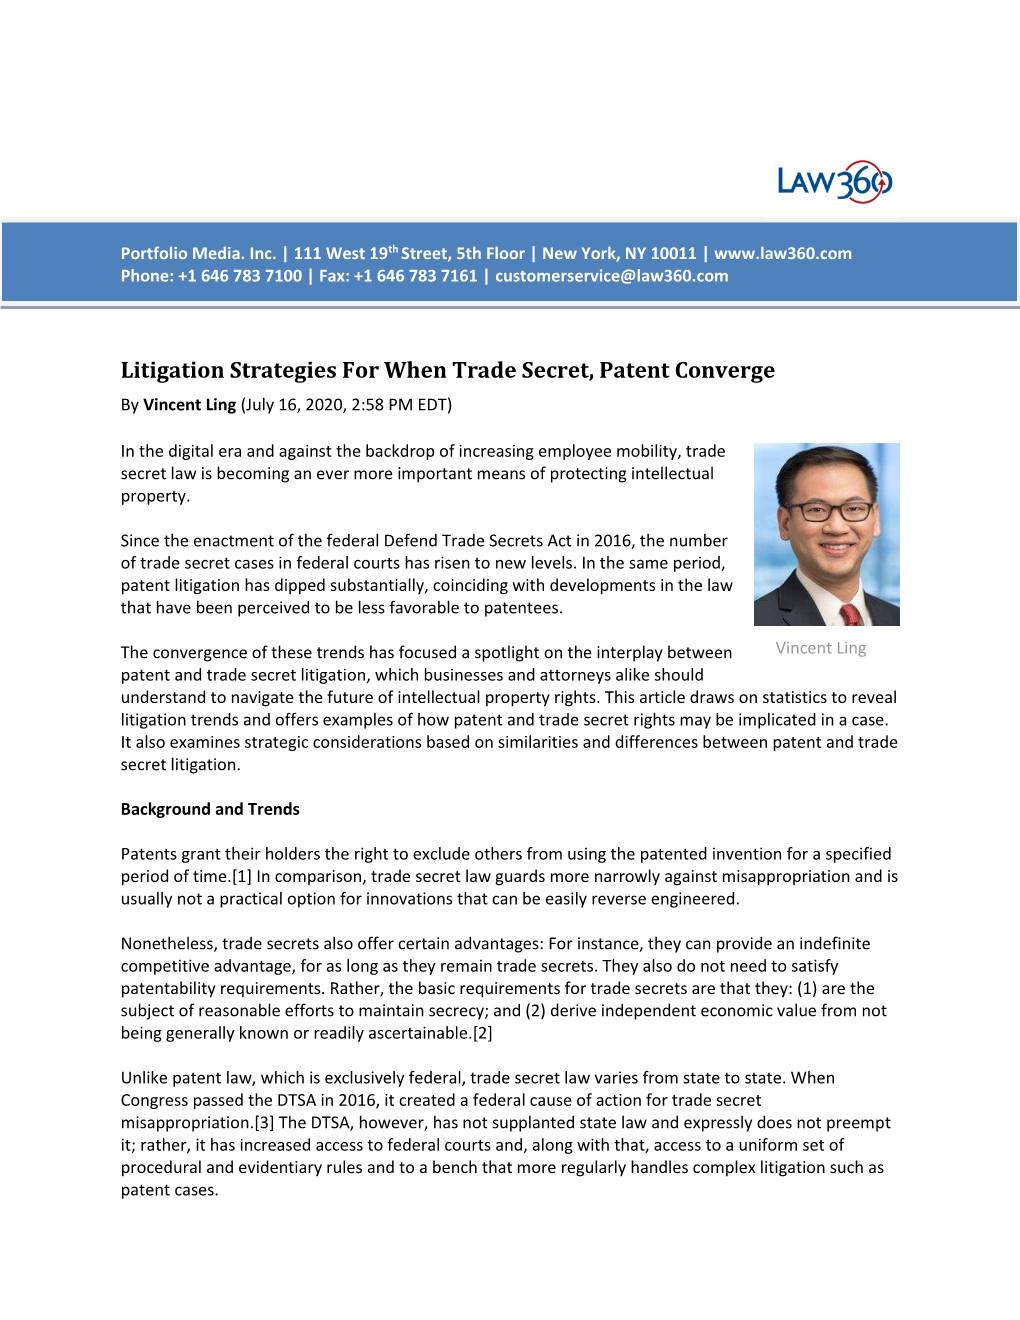 Litigation Strategies for When Trade Secret, Patent Converge by Vincent Ling (July 16, 2020, 2:58 PM EDT)